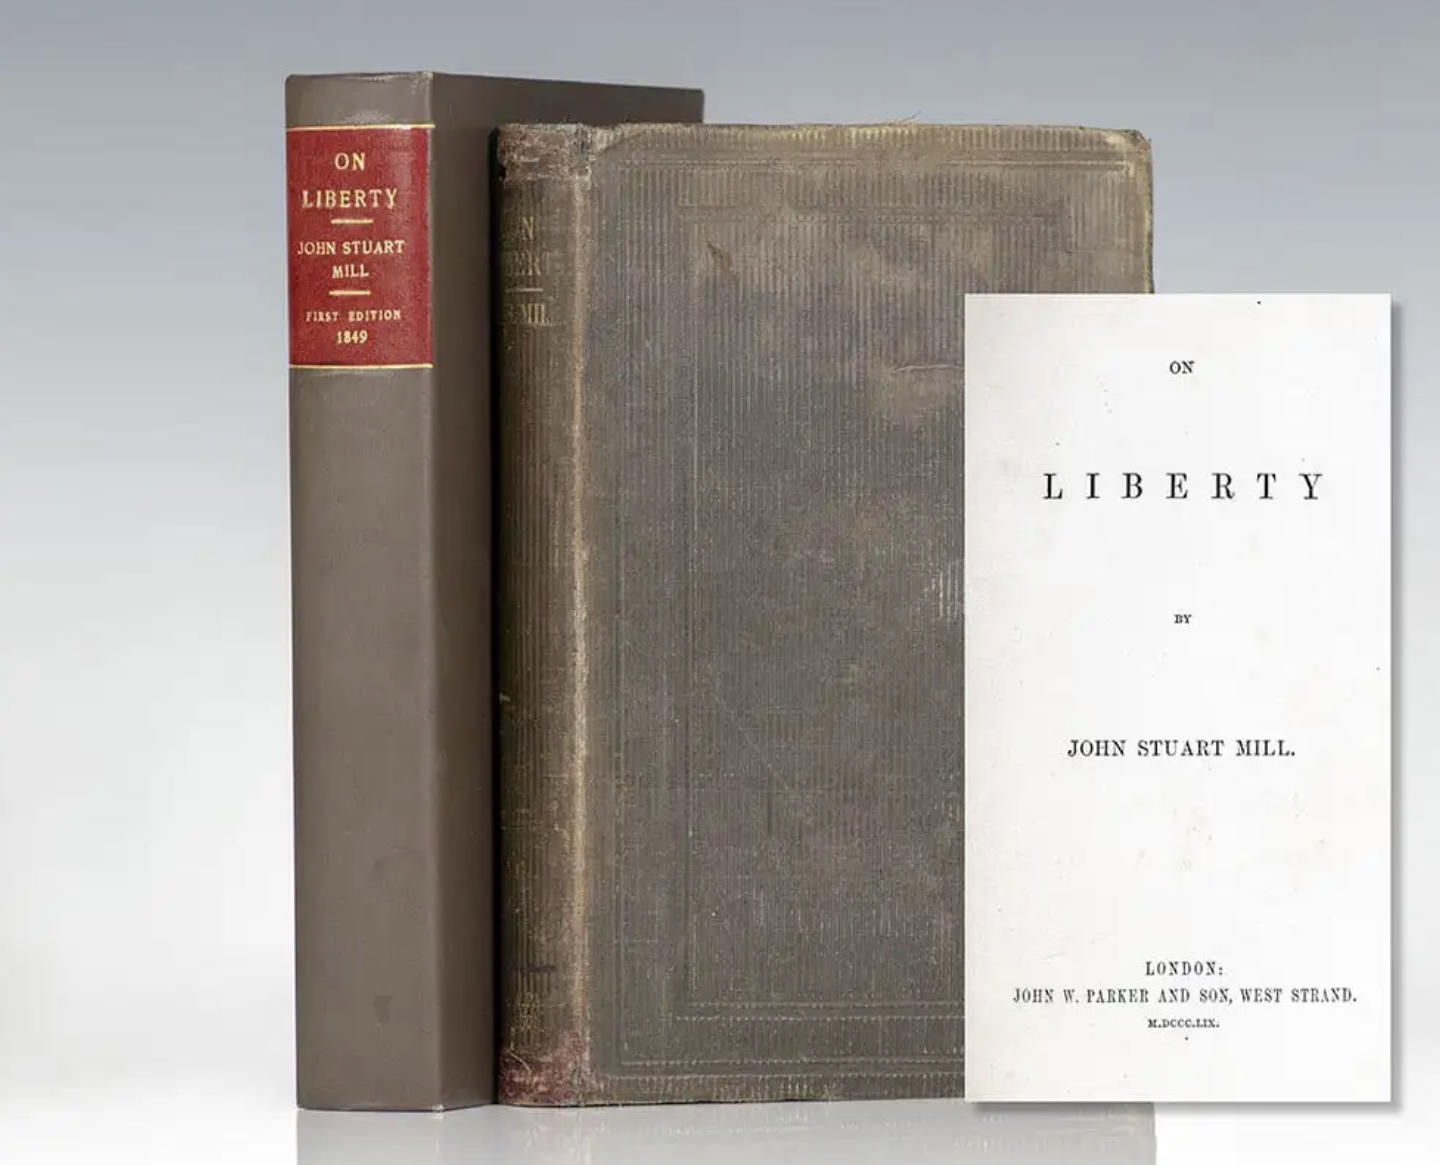 Analyzing John Stuart Mill’s On Liberty in Contemporary and Secondary Contexts